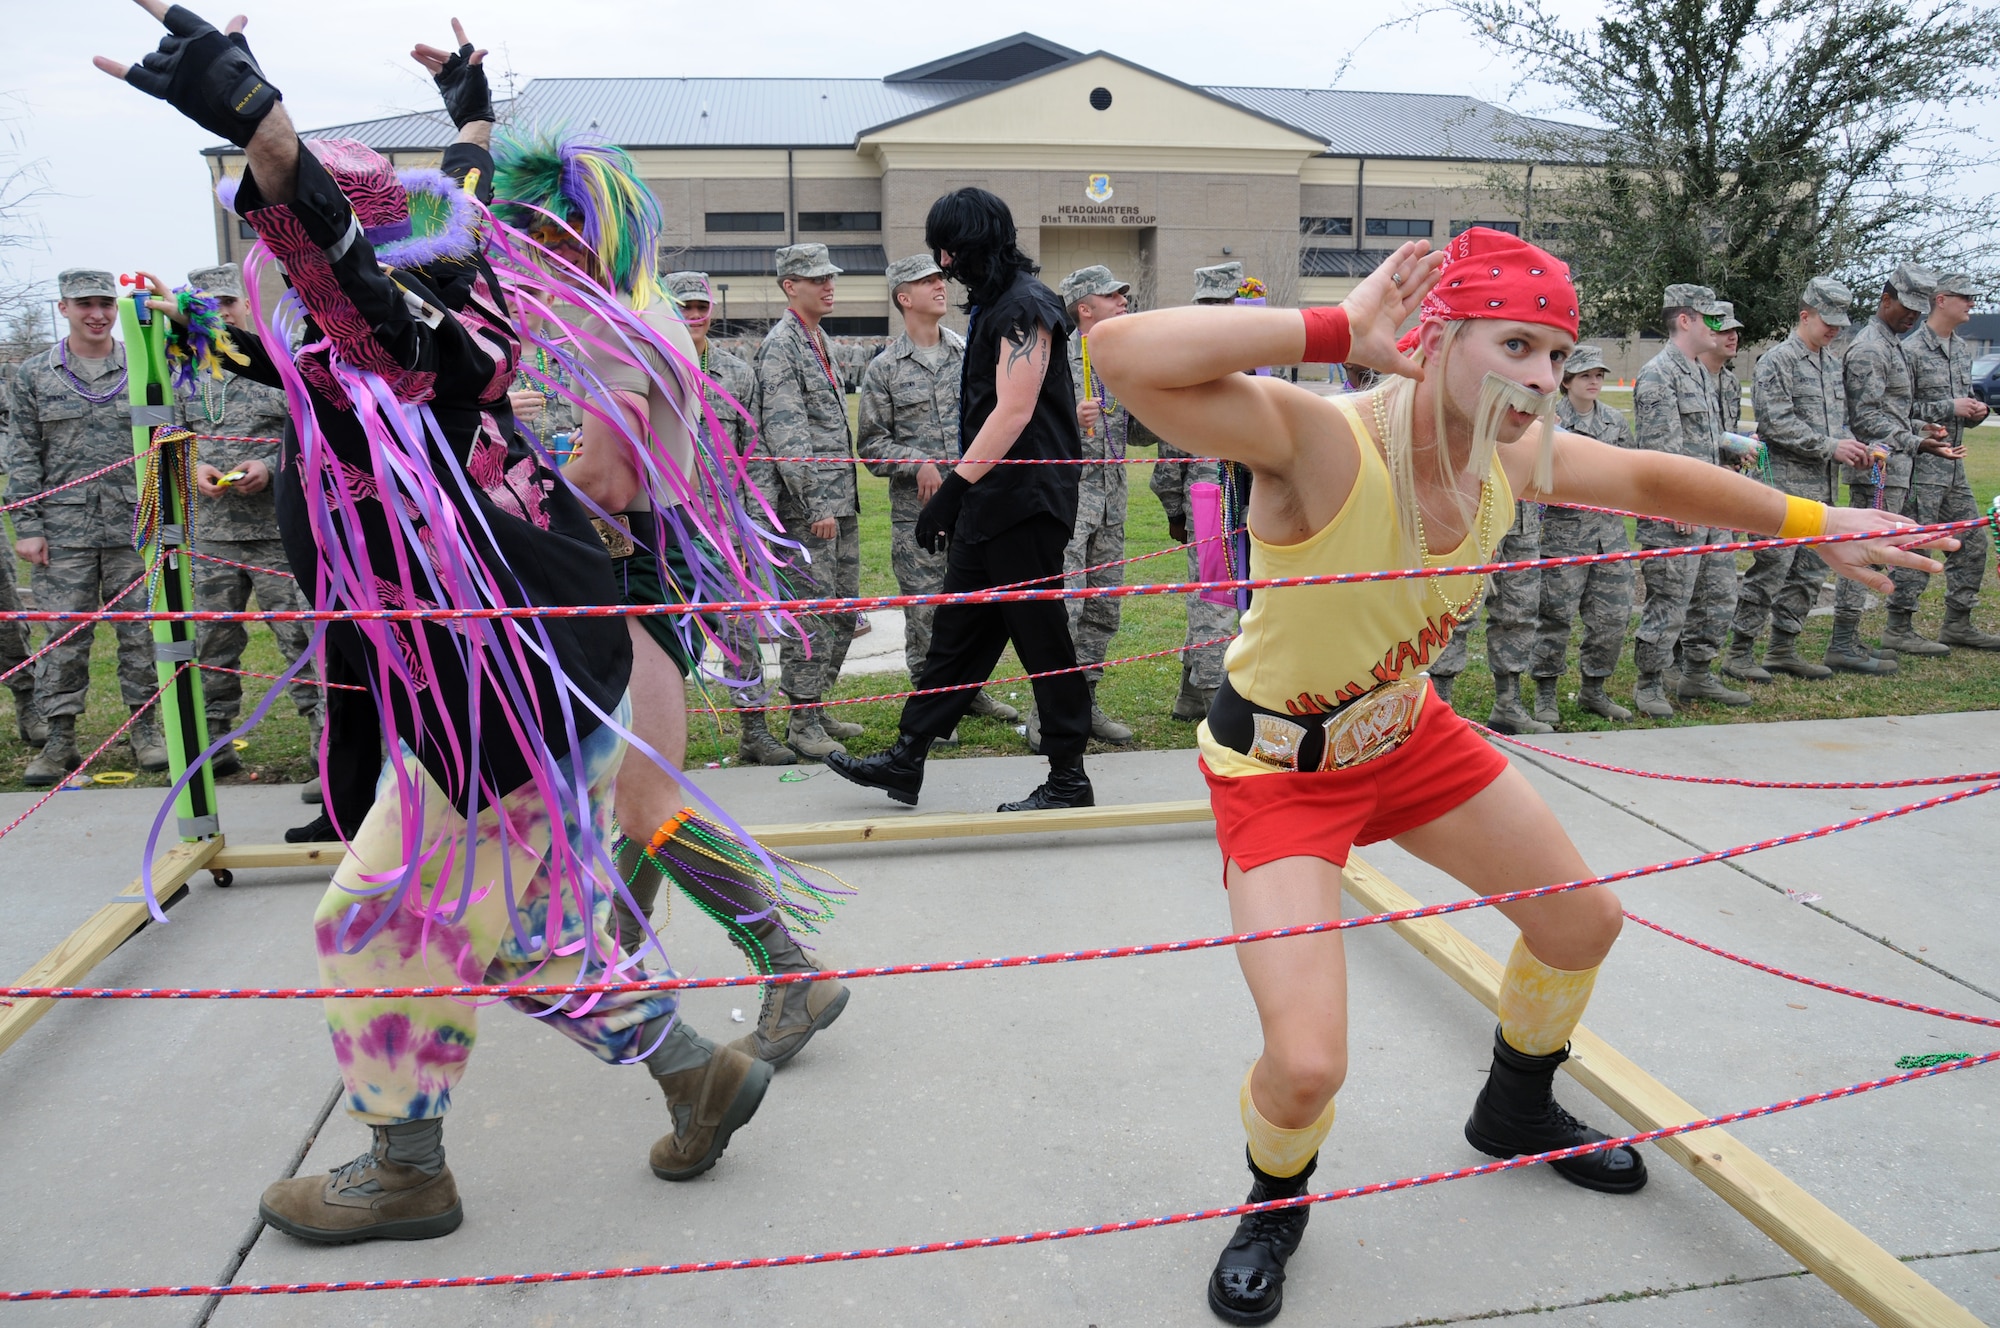 Tech. Sgt. Joseph Dill, 336th Training Squadron, dressed as “Hulk Hogan,” and other squadron members portray professional  wrestlers from the 1980s during the 81st Training Group Mardi Gras parade Feb. 10, 2012, between Thomson Hall and Matero Hall at Keesler Air Force Base, Biloxi, Miss.  They won first place for best theme during the parade.  (U.S. Air Force photo by Kemberly Groue)